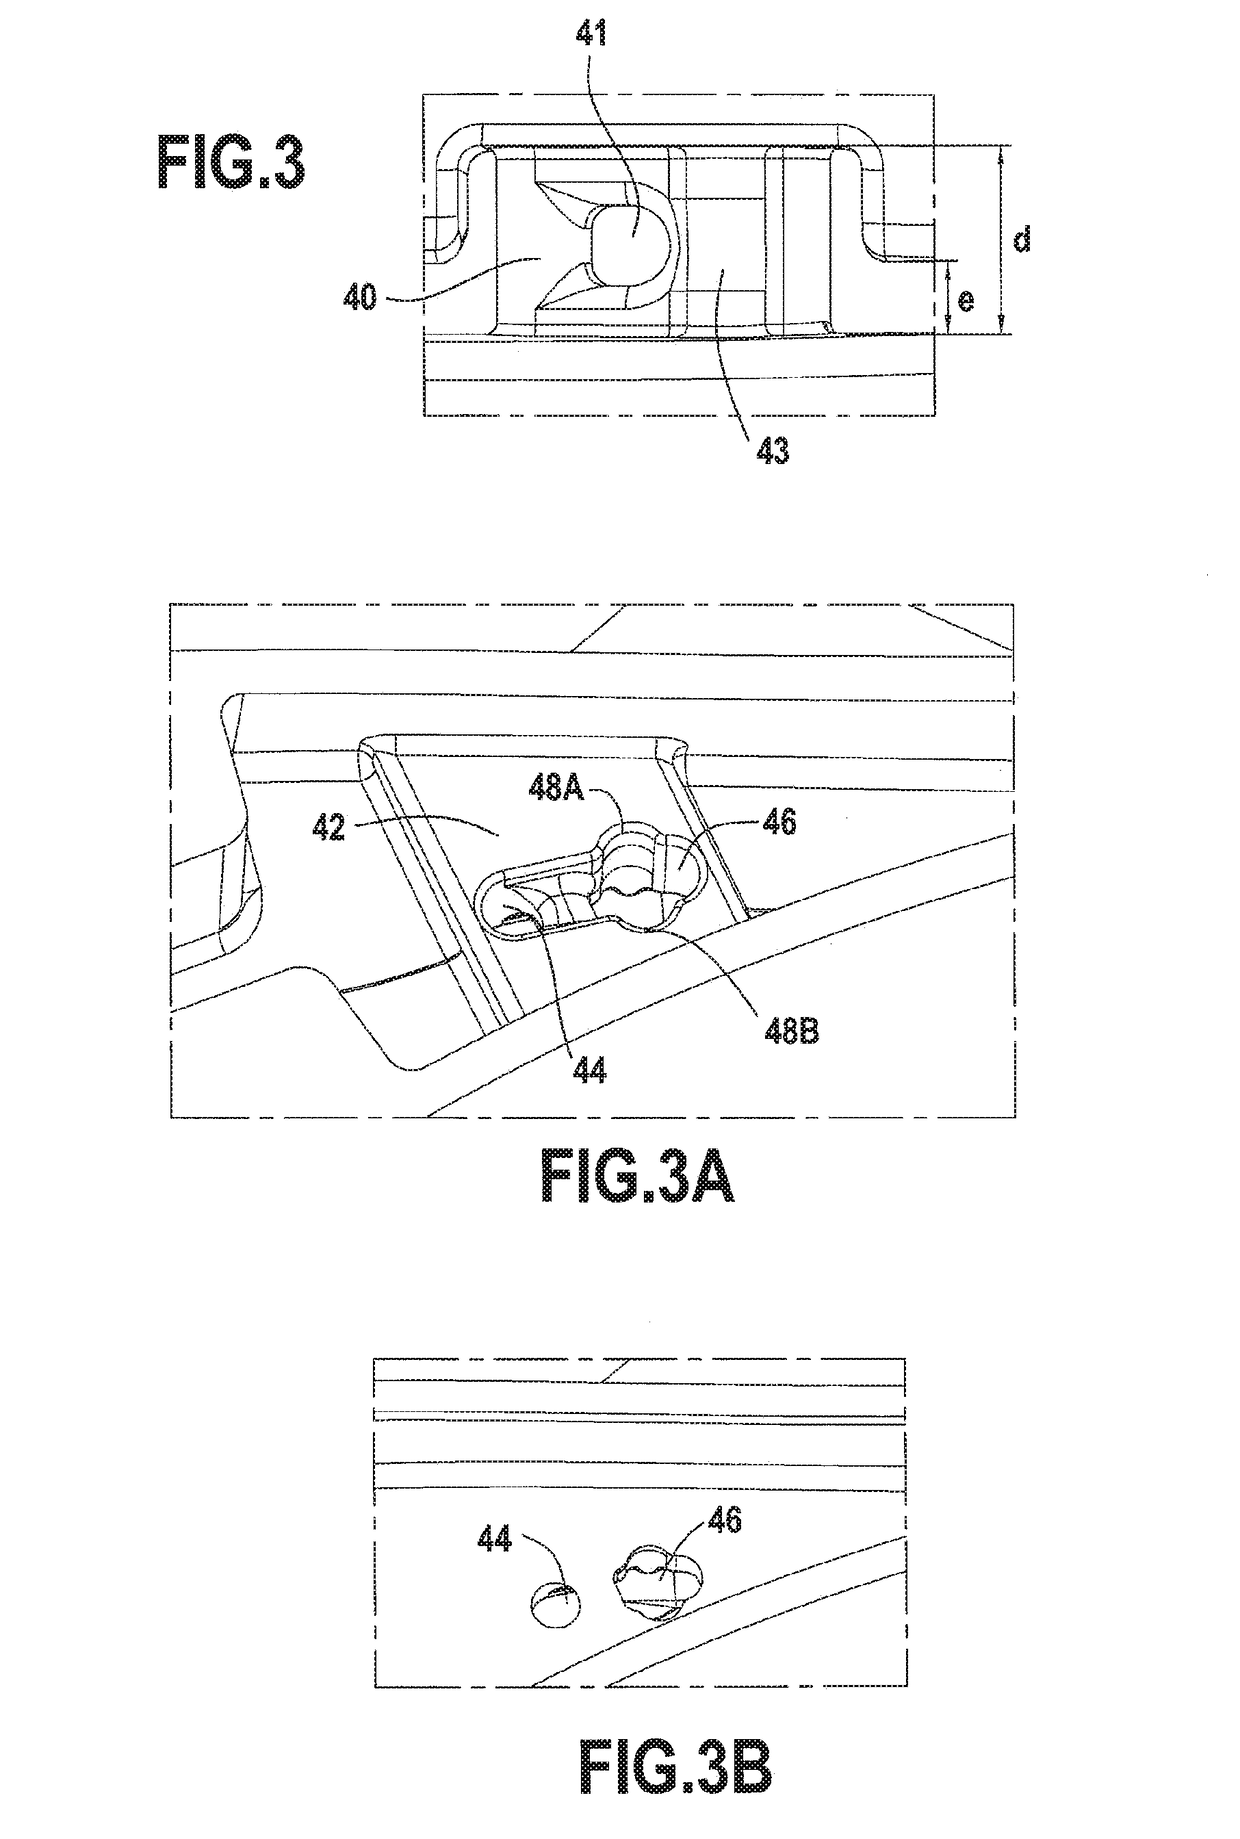 A method of forming dust-removal holes for a turbine blade, and an associated ceramic core